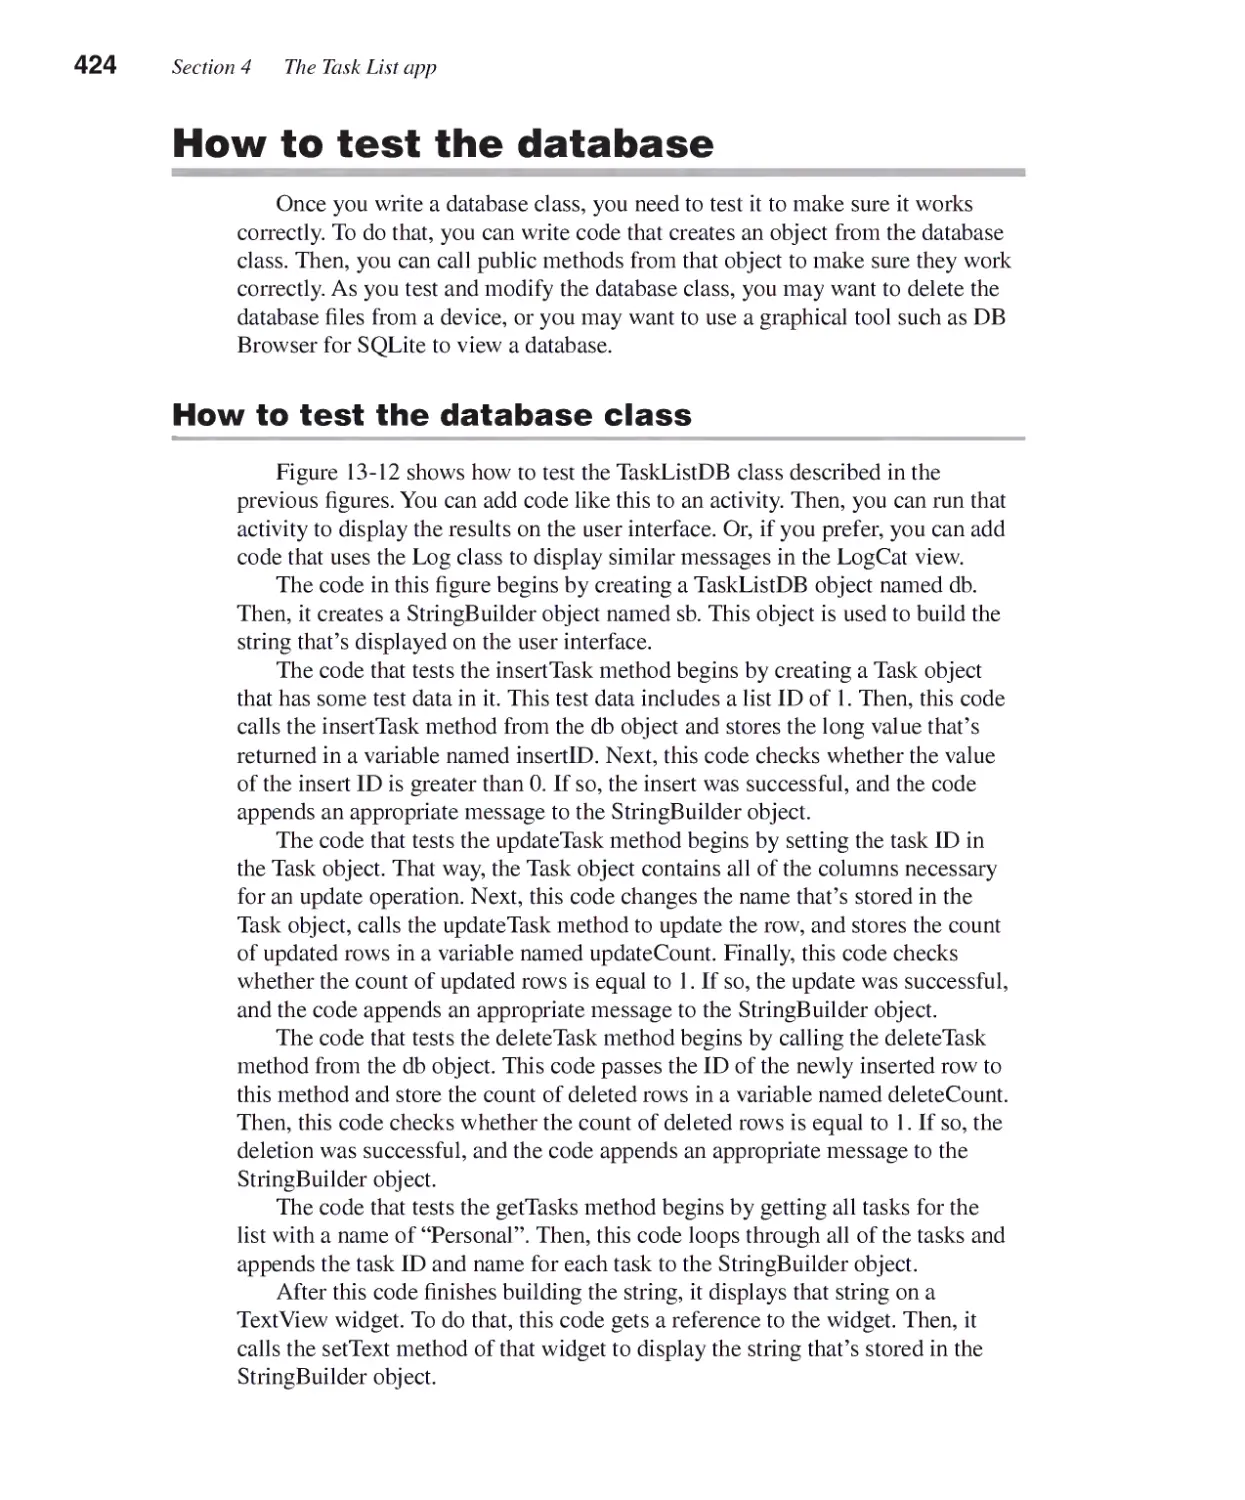 How to Test the Database